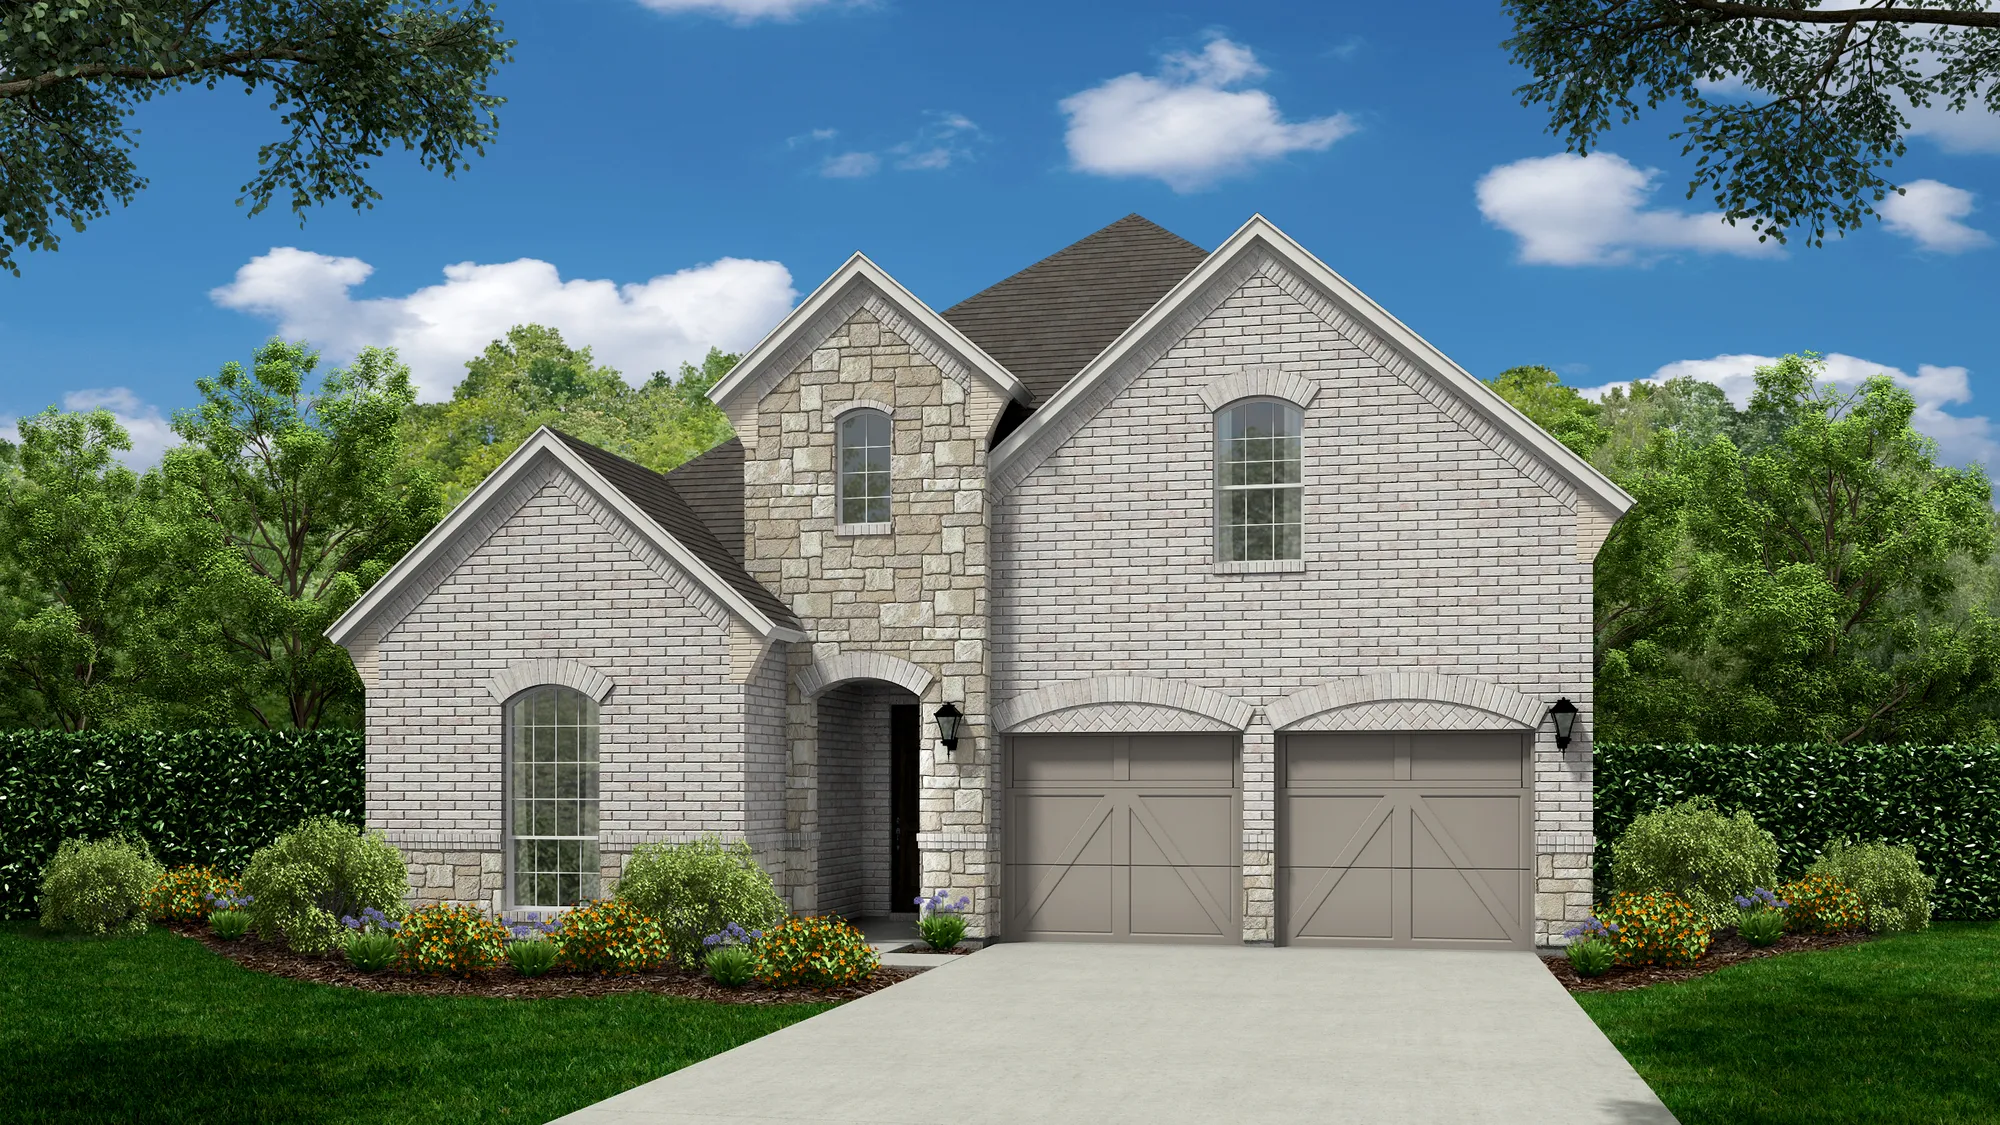 Plan 1195 Elevation A with Stone